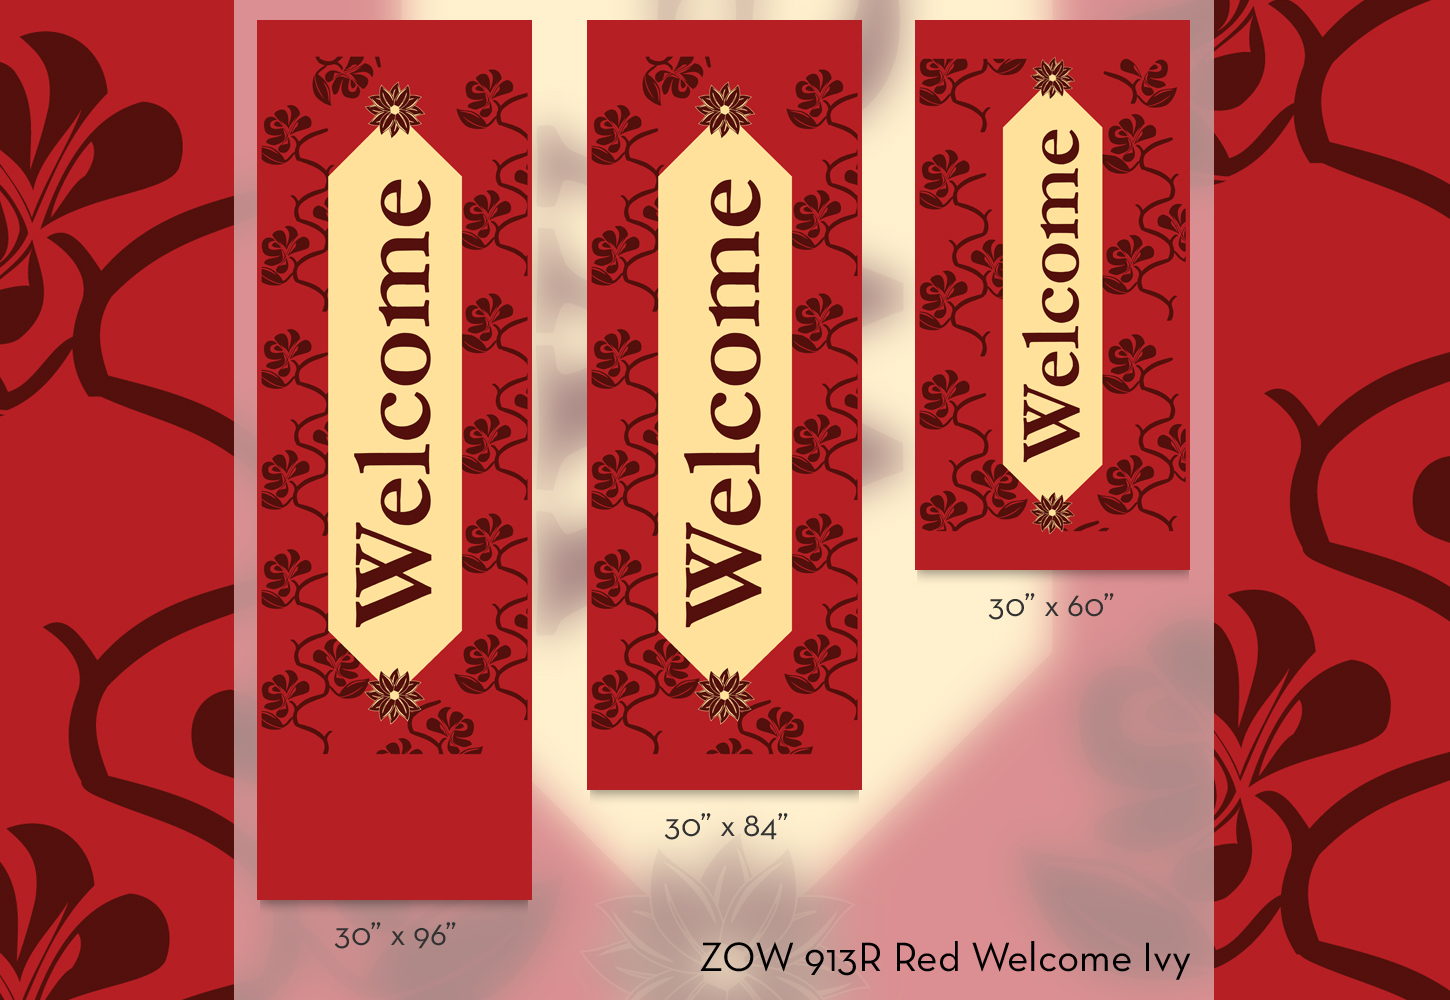 ZOW 913R Red Welcome Ivy